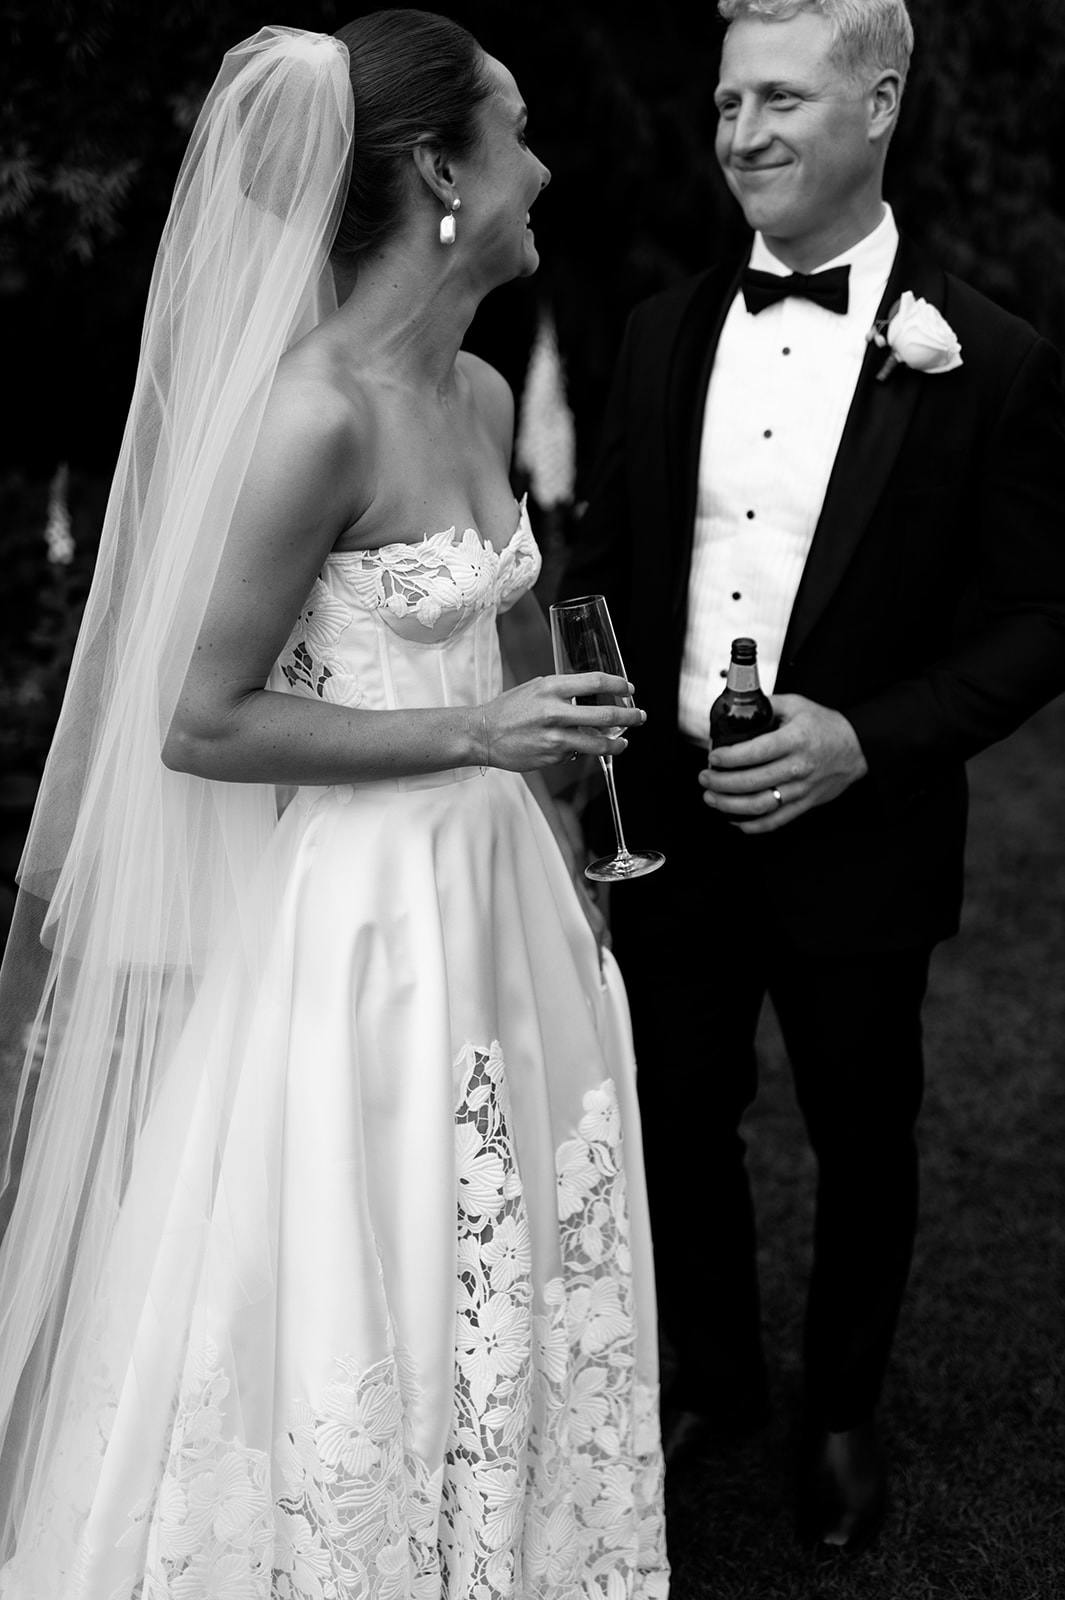 A bride and groom share a joyful moment. The bride, in a strapless wedding dress with a veil, holds a glass of wine. The groom, wearing a tuxedo and bow tie, holds a bottle of beer. They are smiling at each other against a dark, outdoor background.